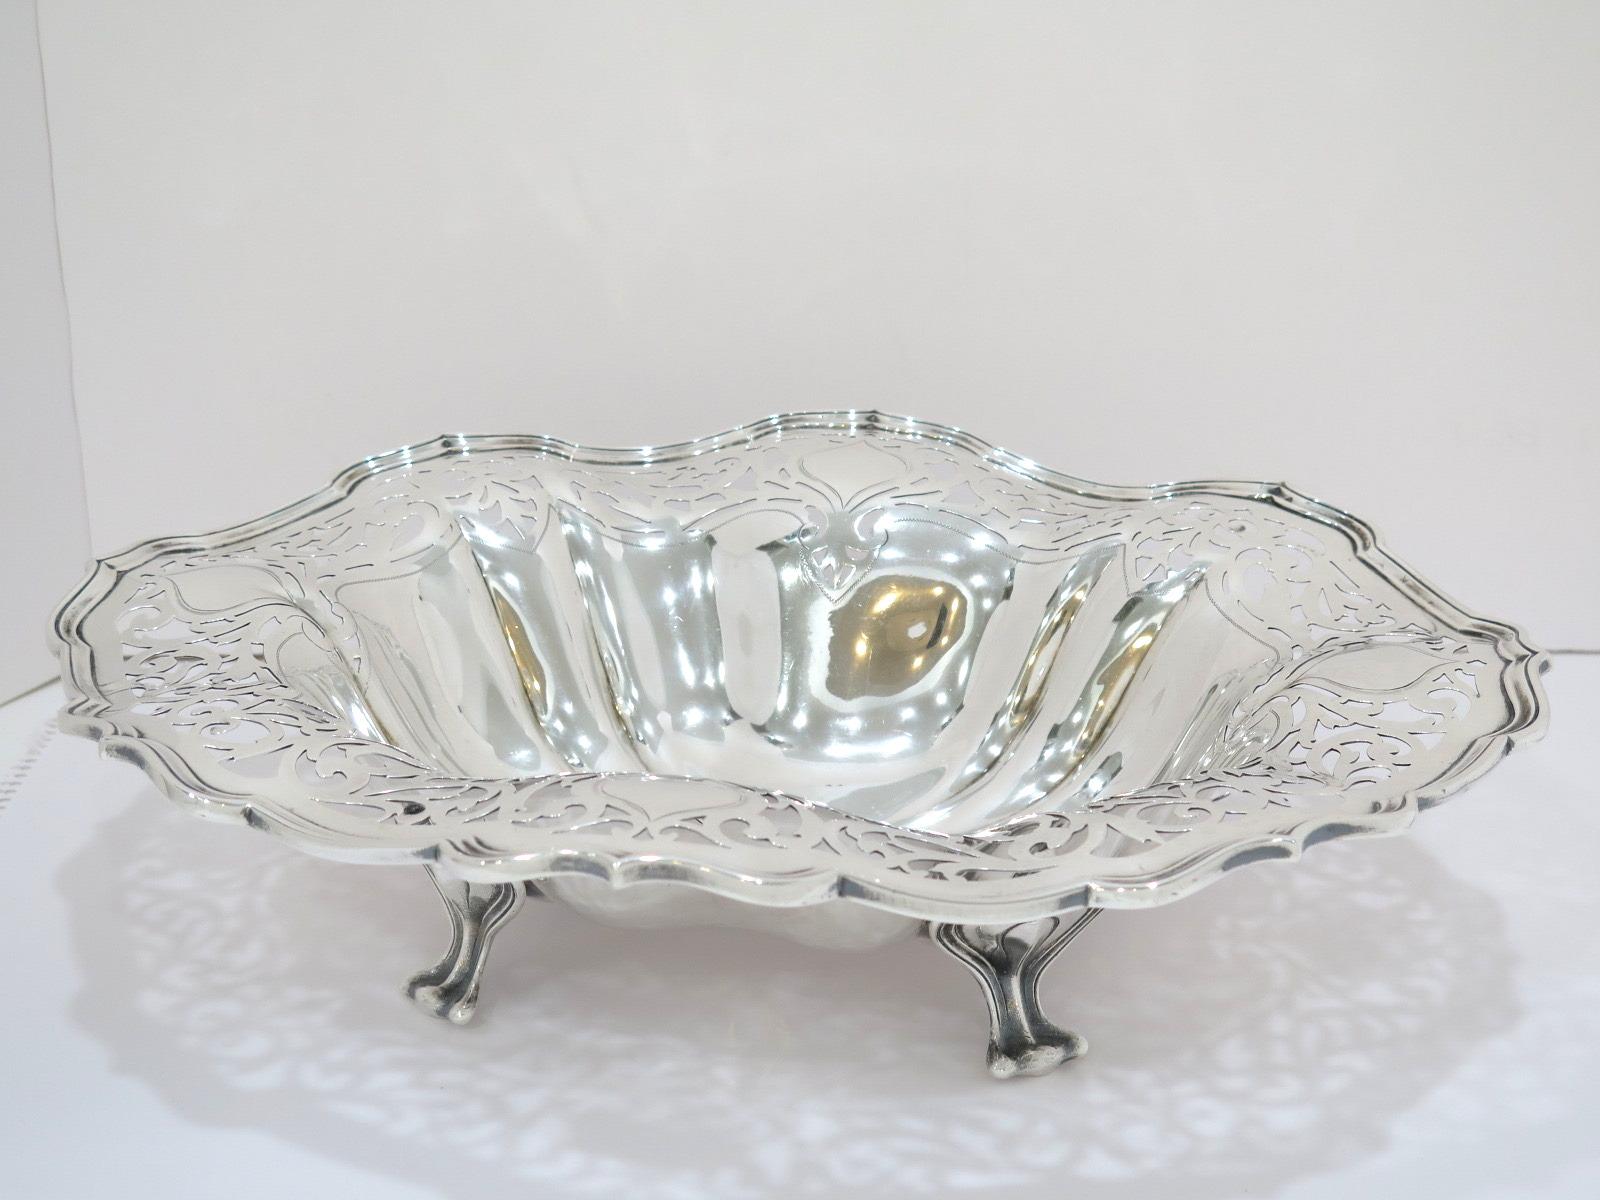 American 16 in - Sterling Silver Mauser Antique Scroll Openwork Footed Oval Serving Bowl